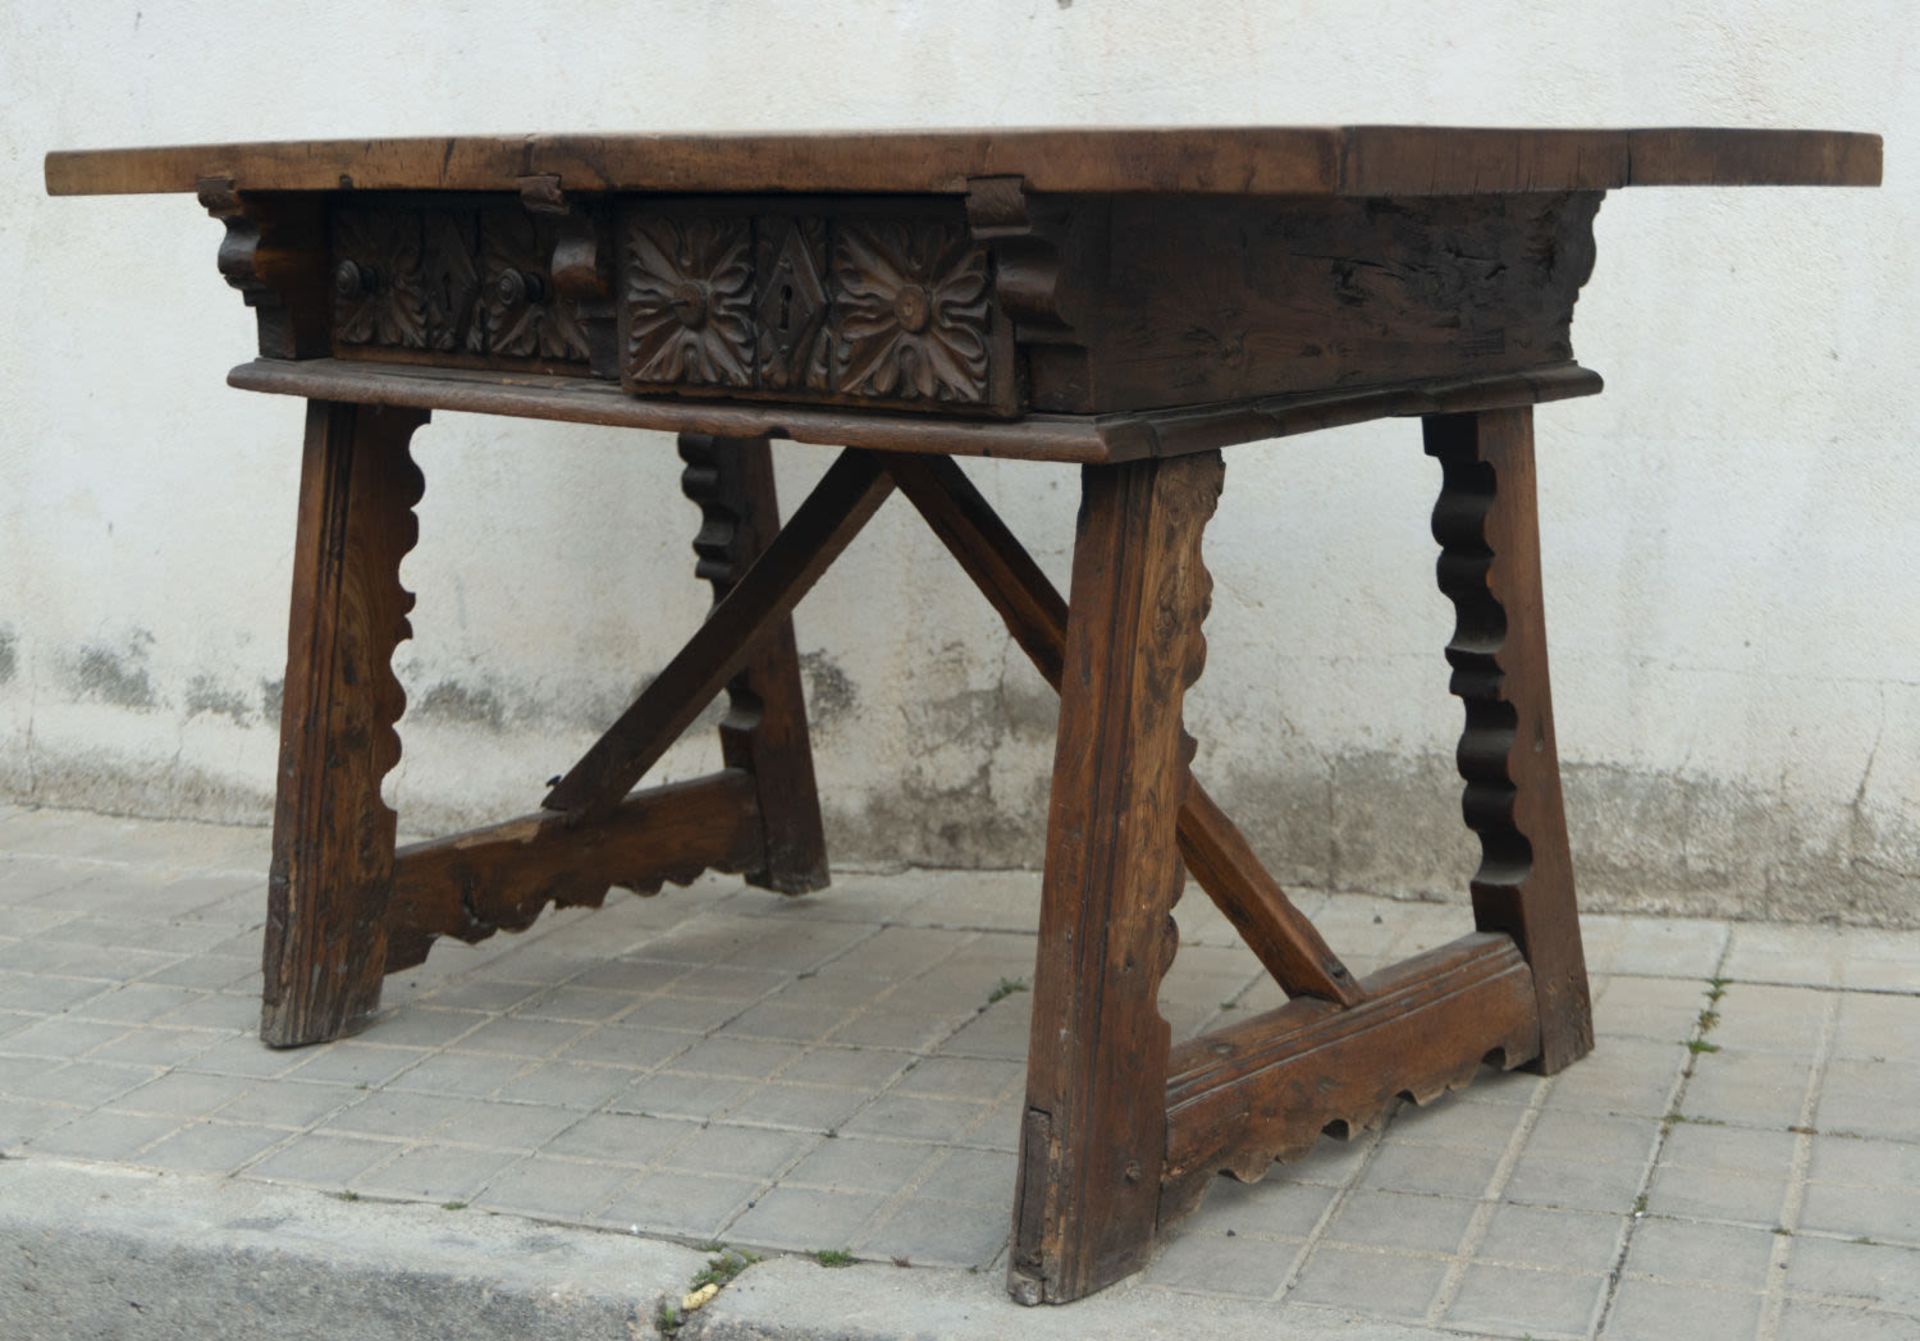 Tyrolean or German kitchen table from Bavaria in oak wood from the 16th century, Swiss or German Ren - Image 3 of 4